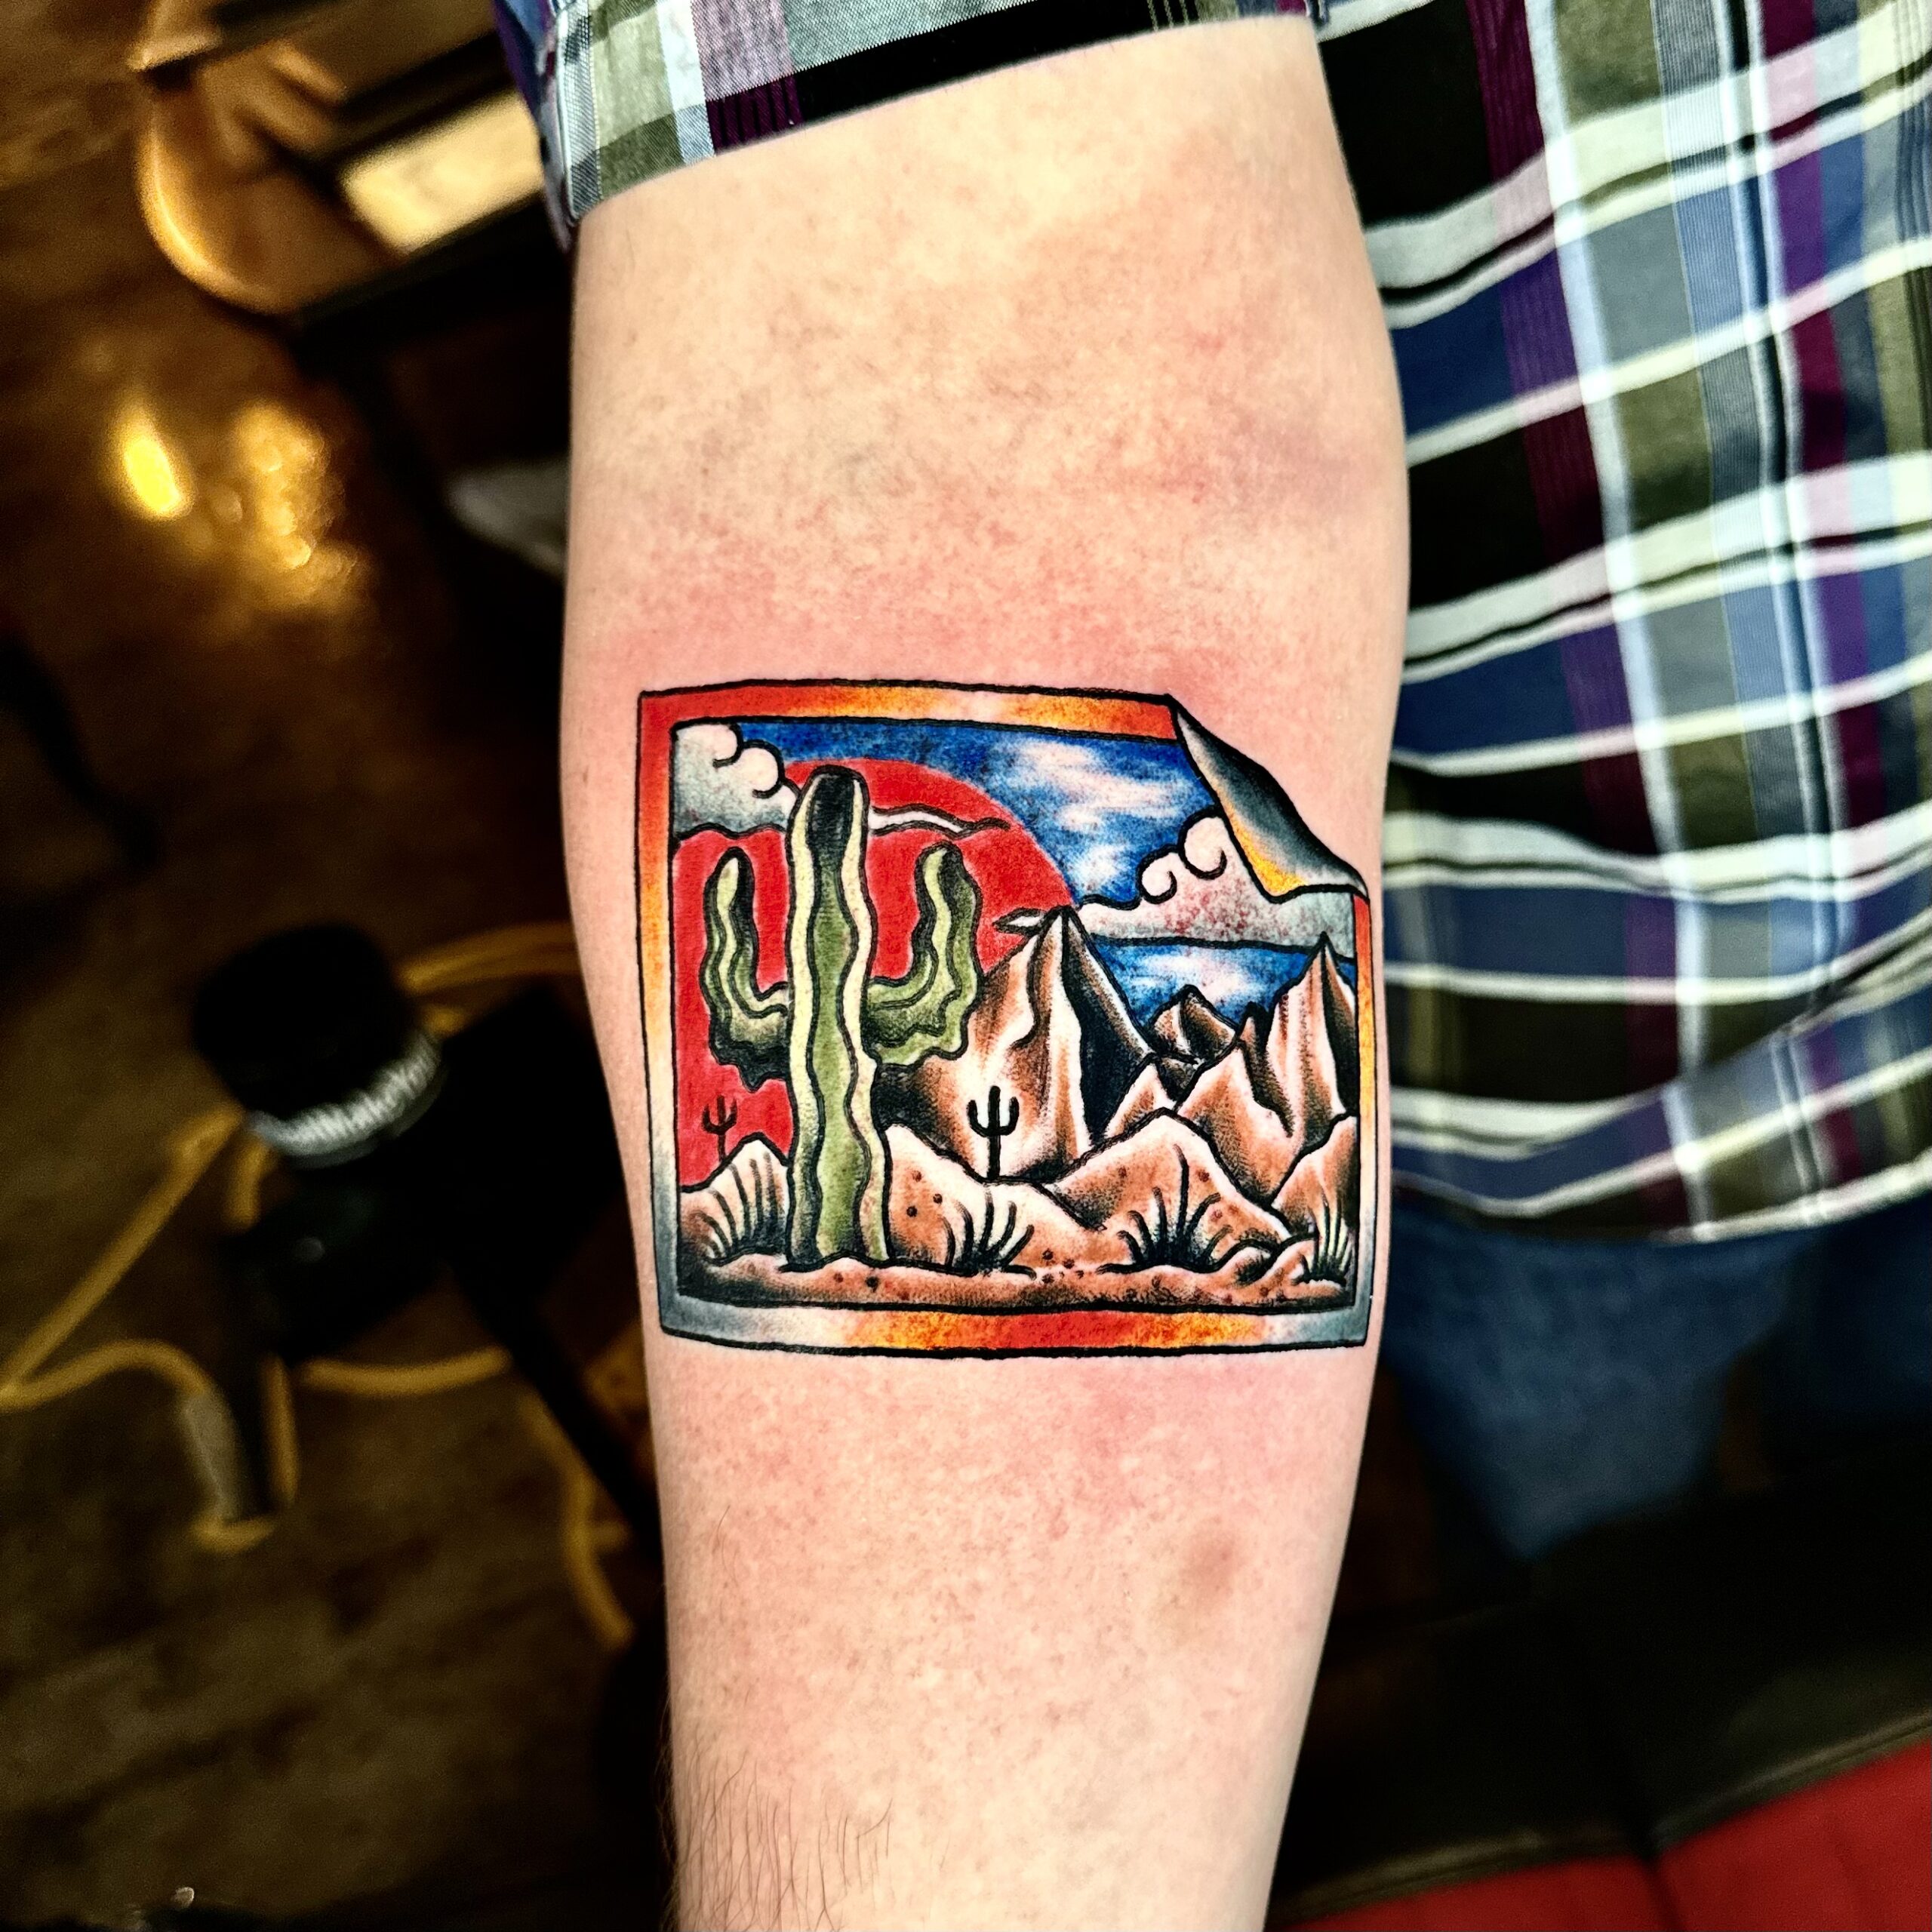 Tattoo of a picture of a desert and mountains